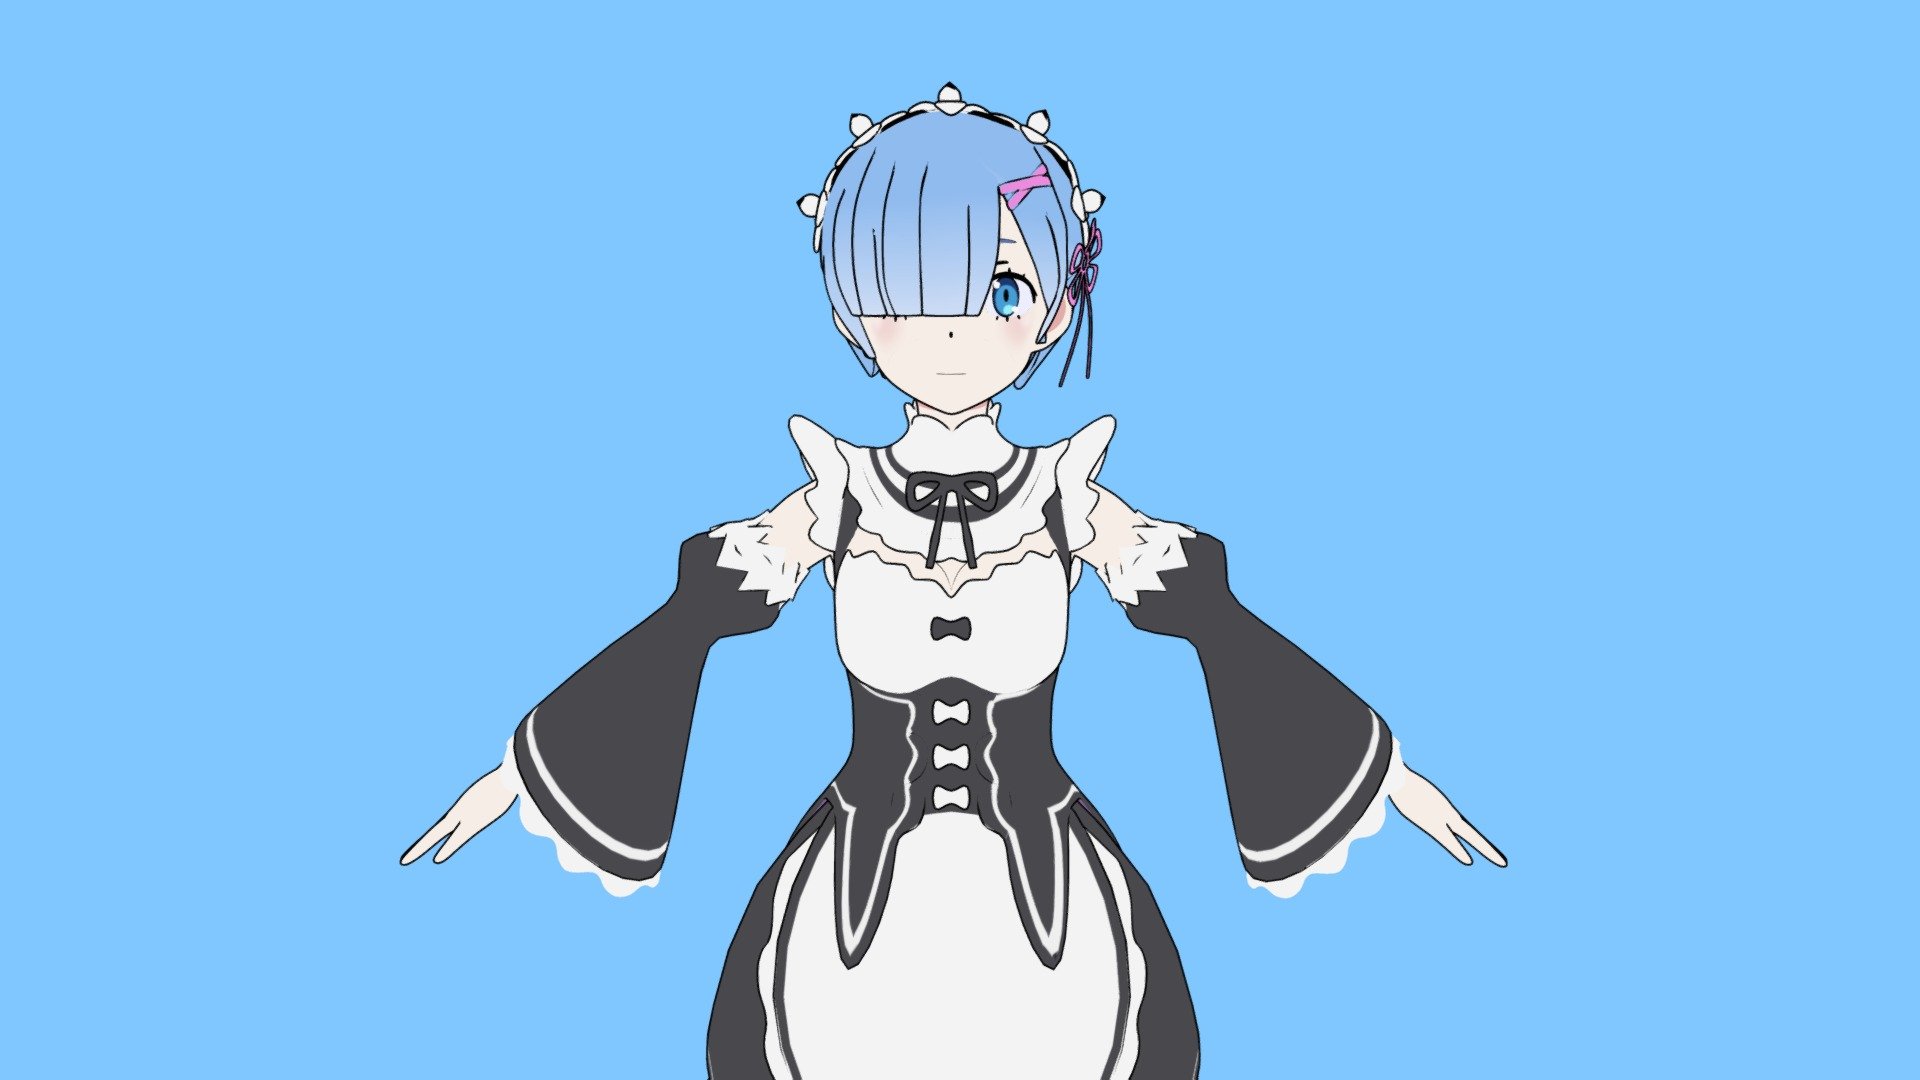 Rem - Re Zero anime 3D model animated rigged